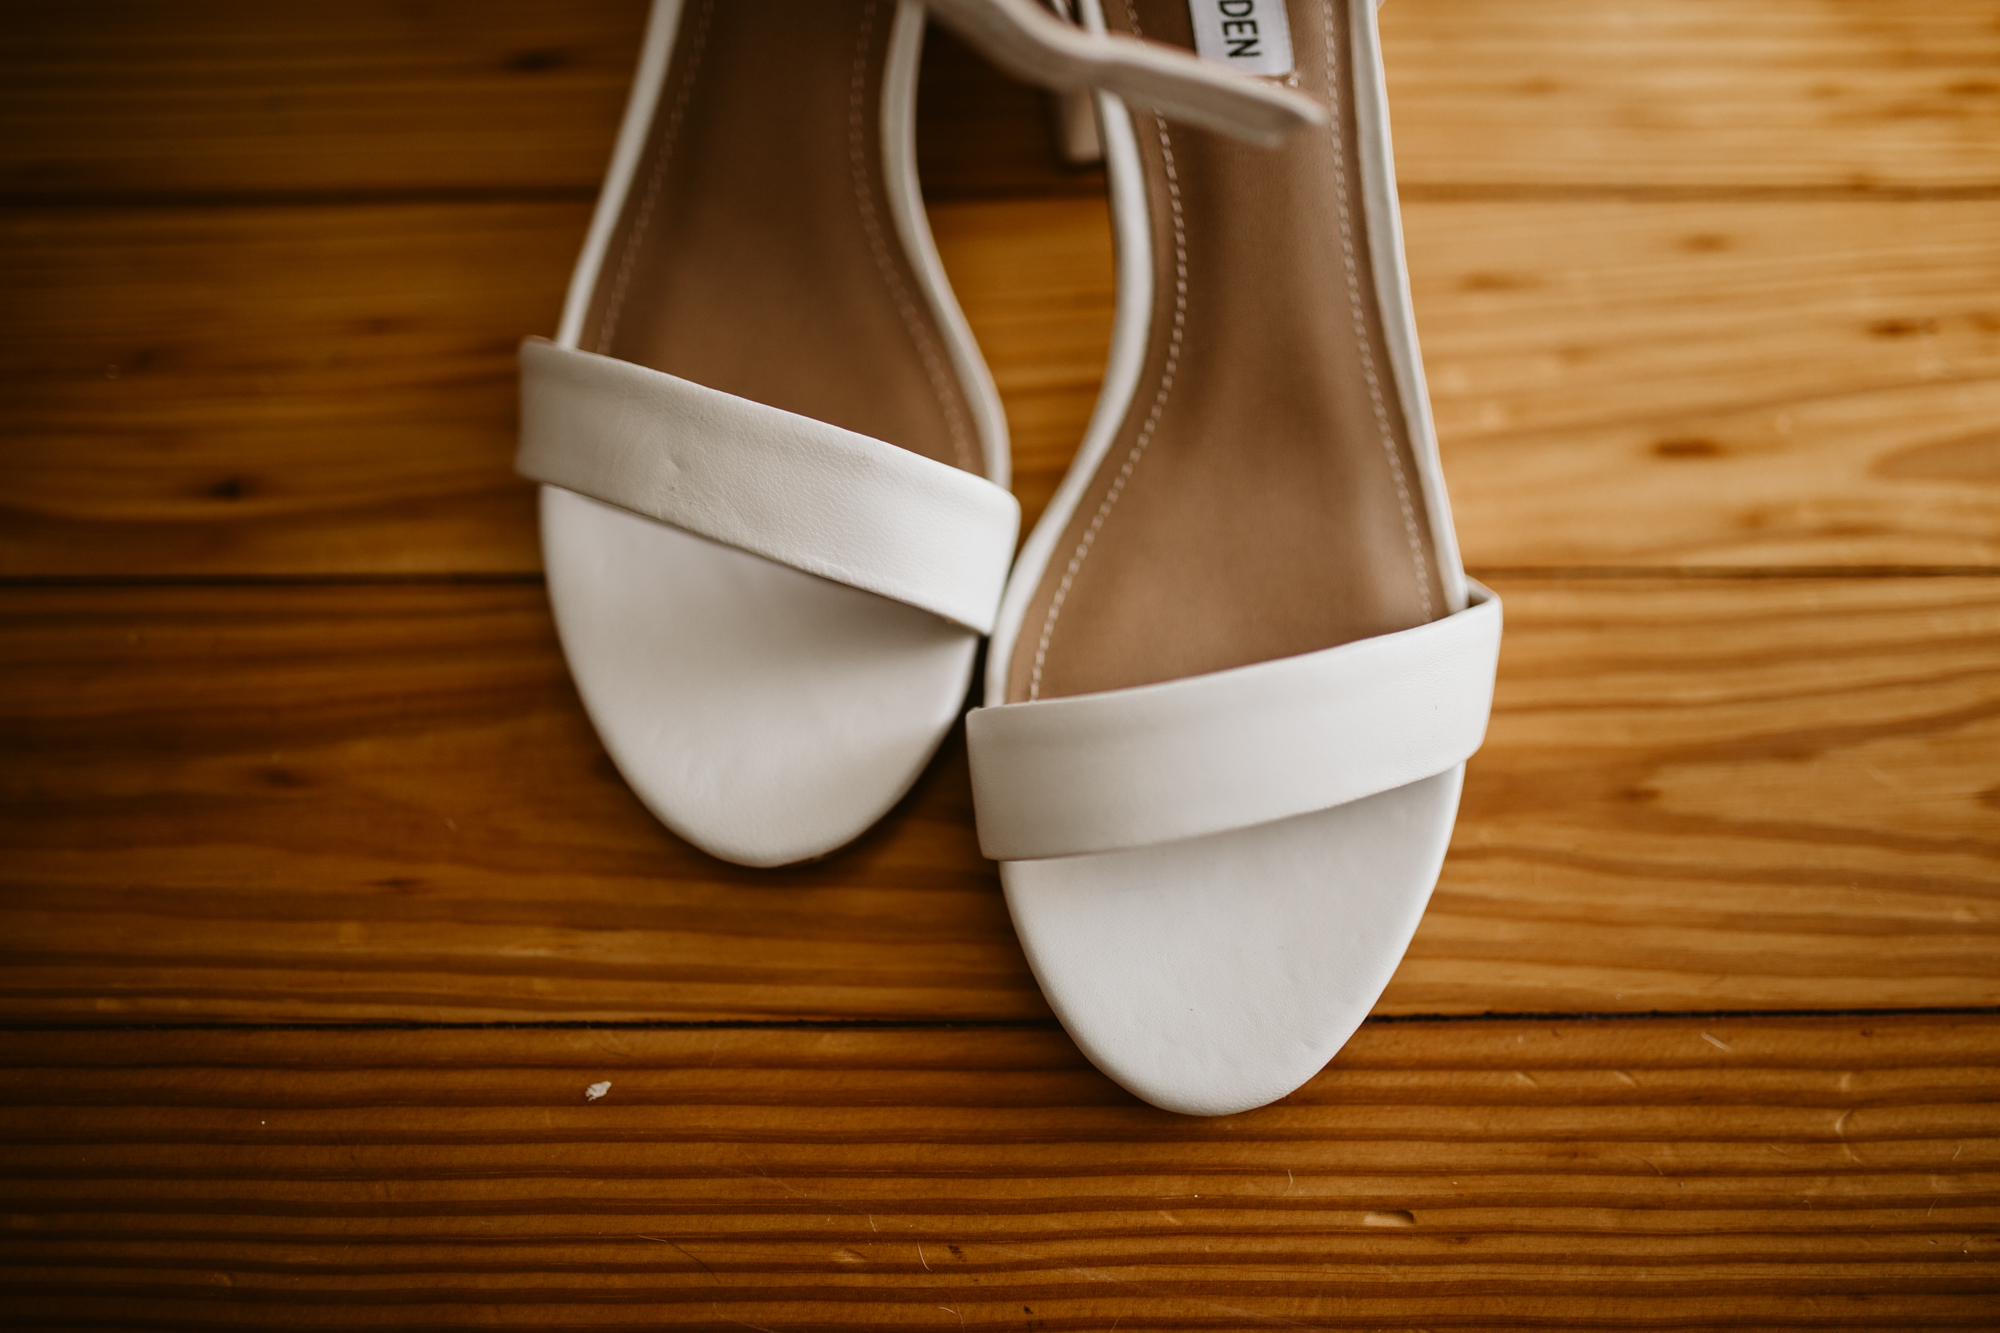 Bride's wedding shoes on the wooden floors of stone house of st charles